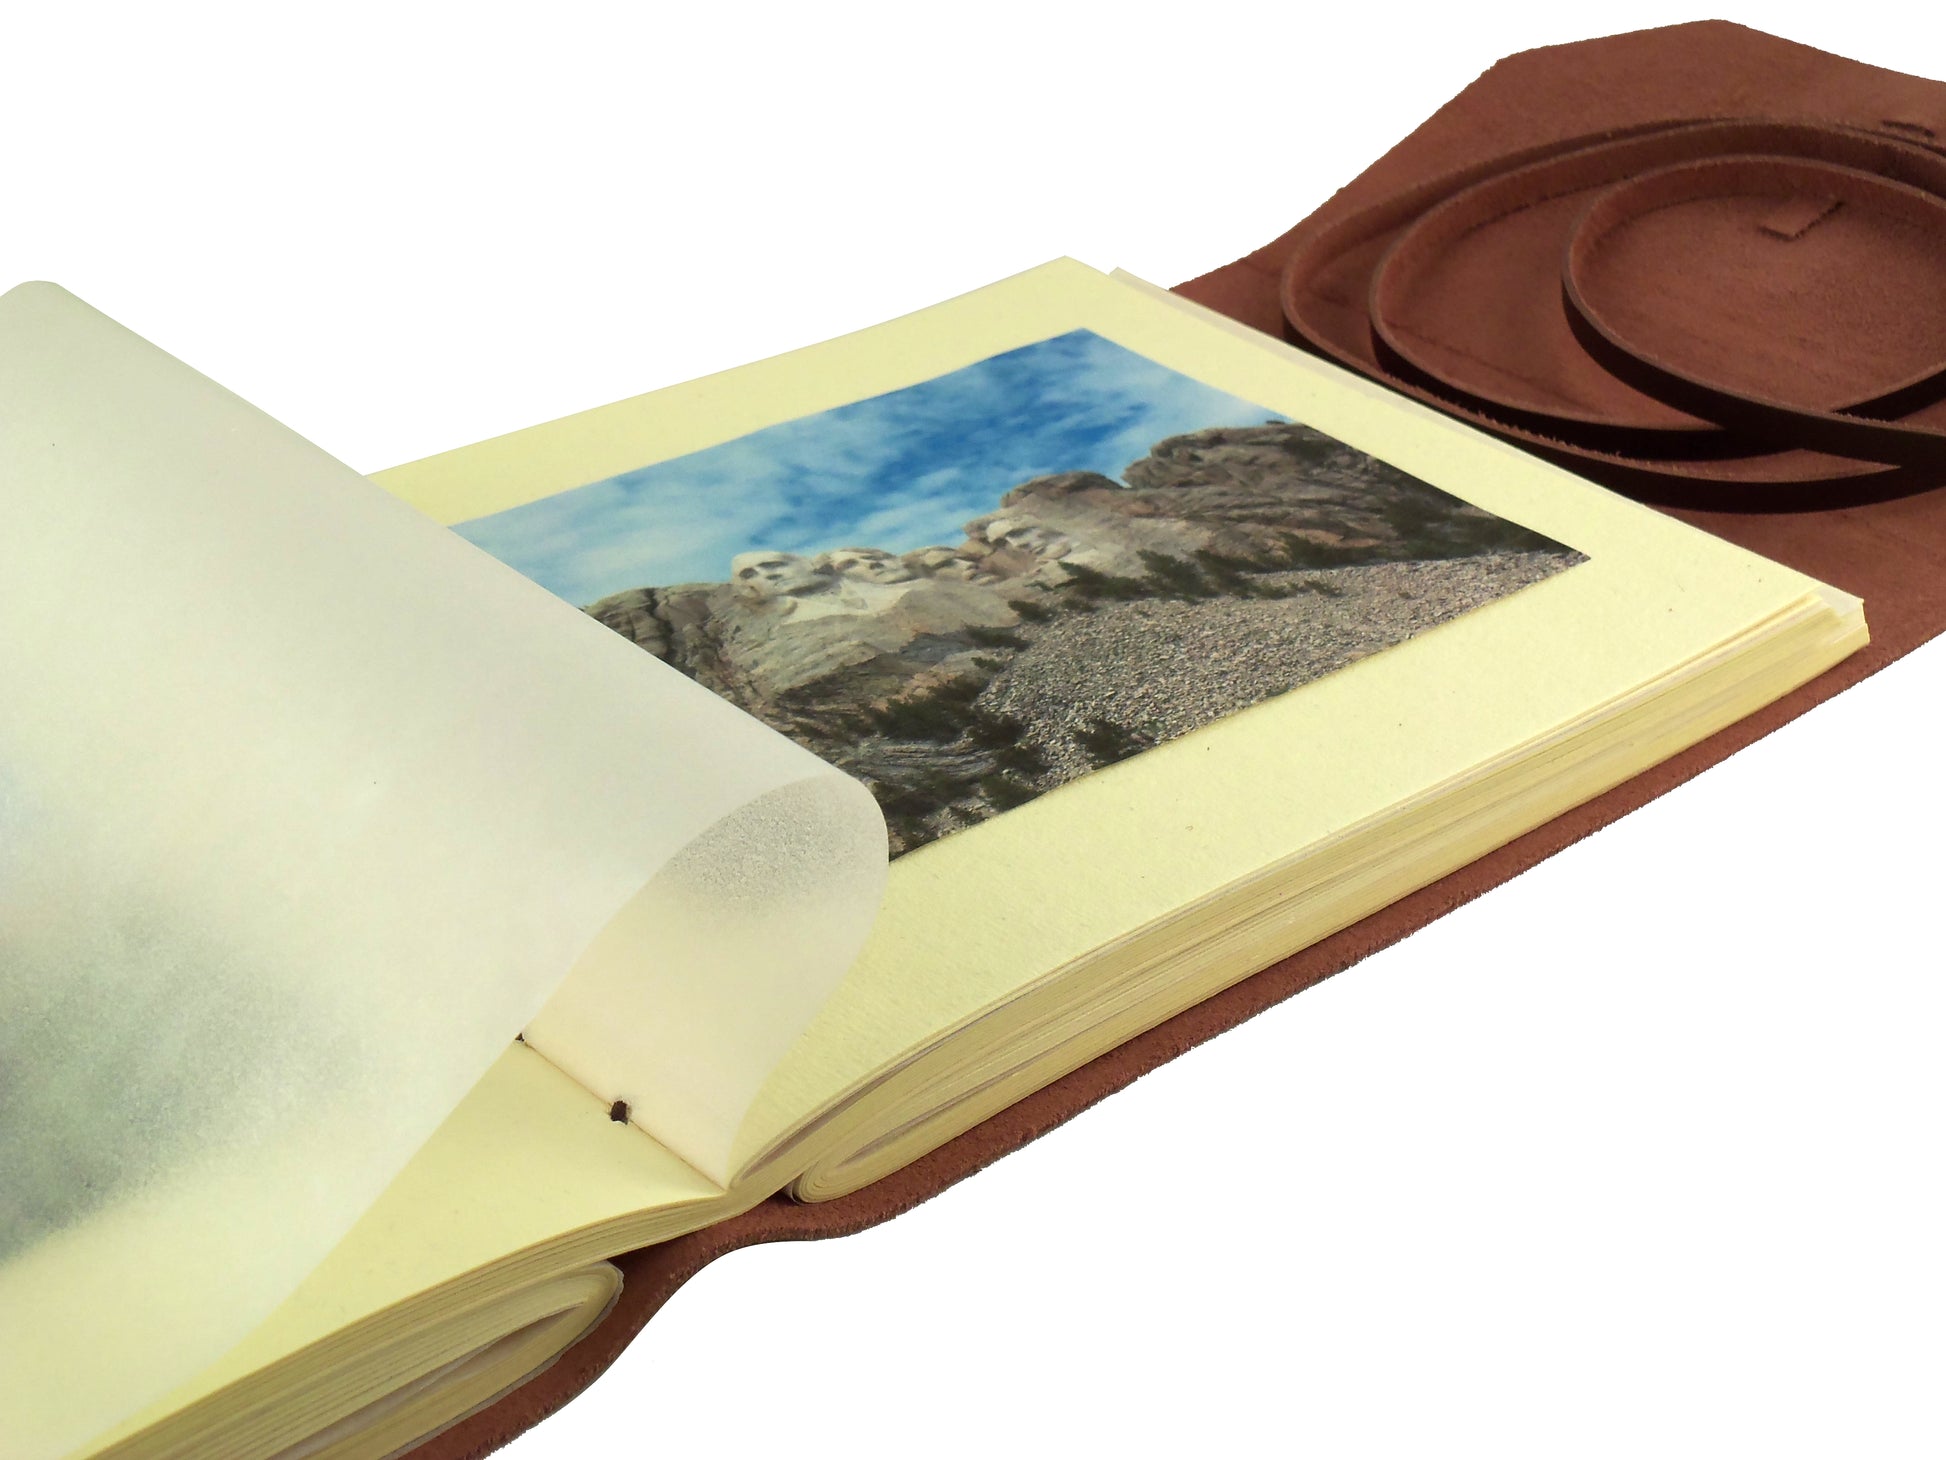 Rustic Leather Coffee Table Photo Album with Gift Box - Holds 100 4x6 or 5x7 Photos - 6x8" - Rustic Ridge Leather